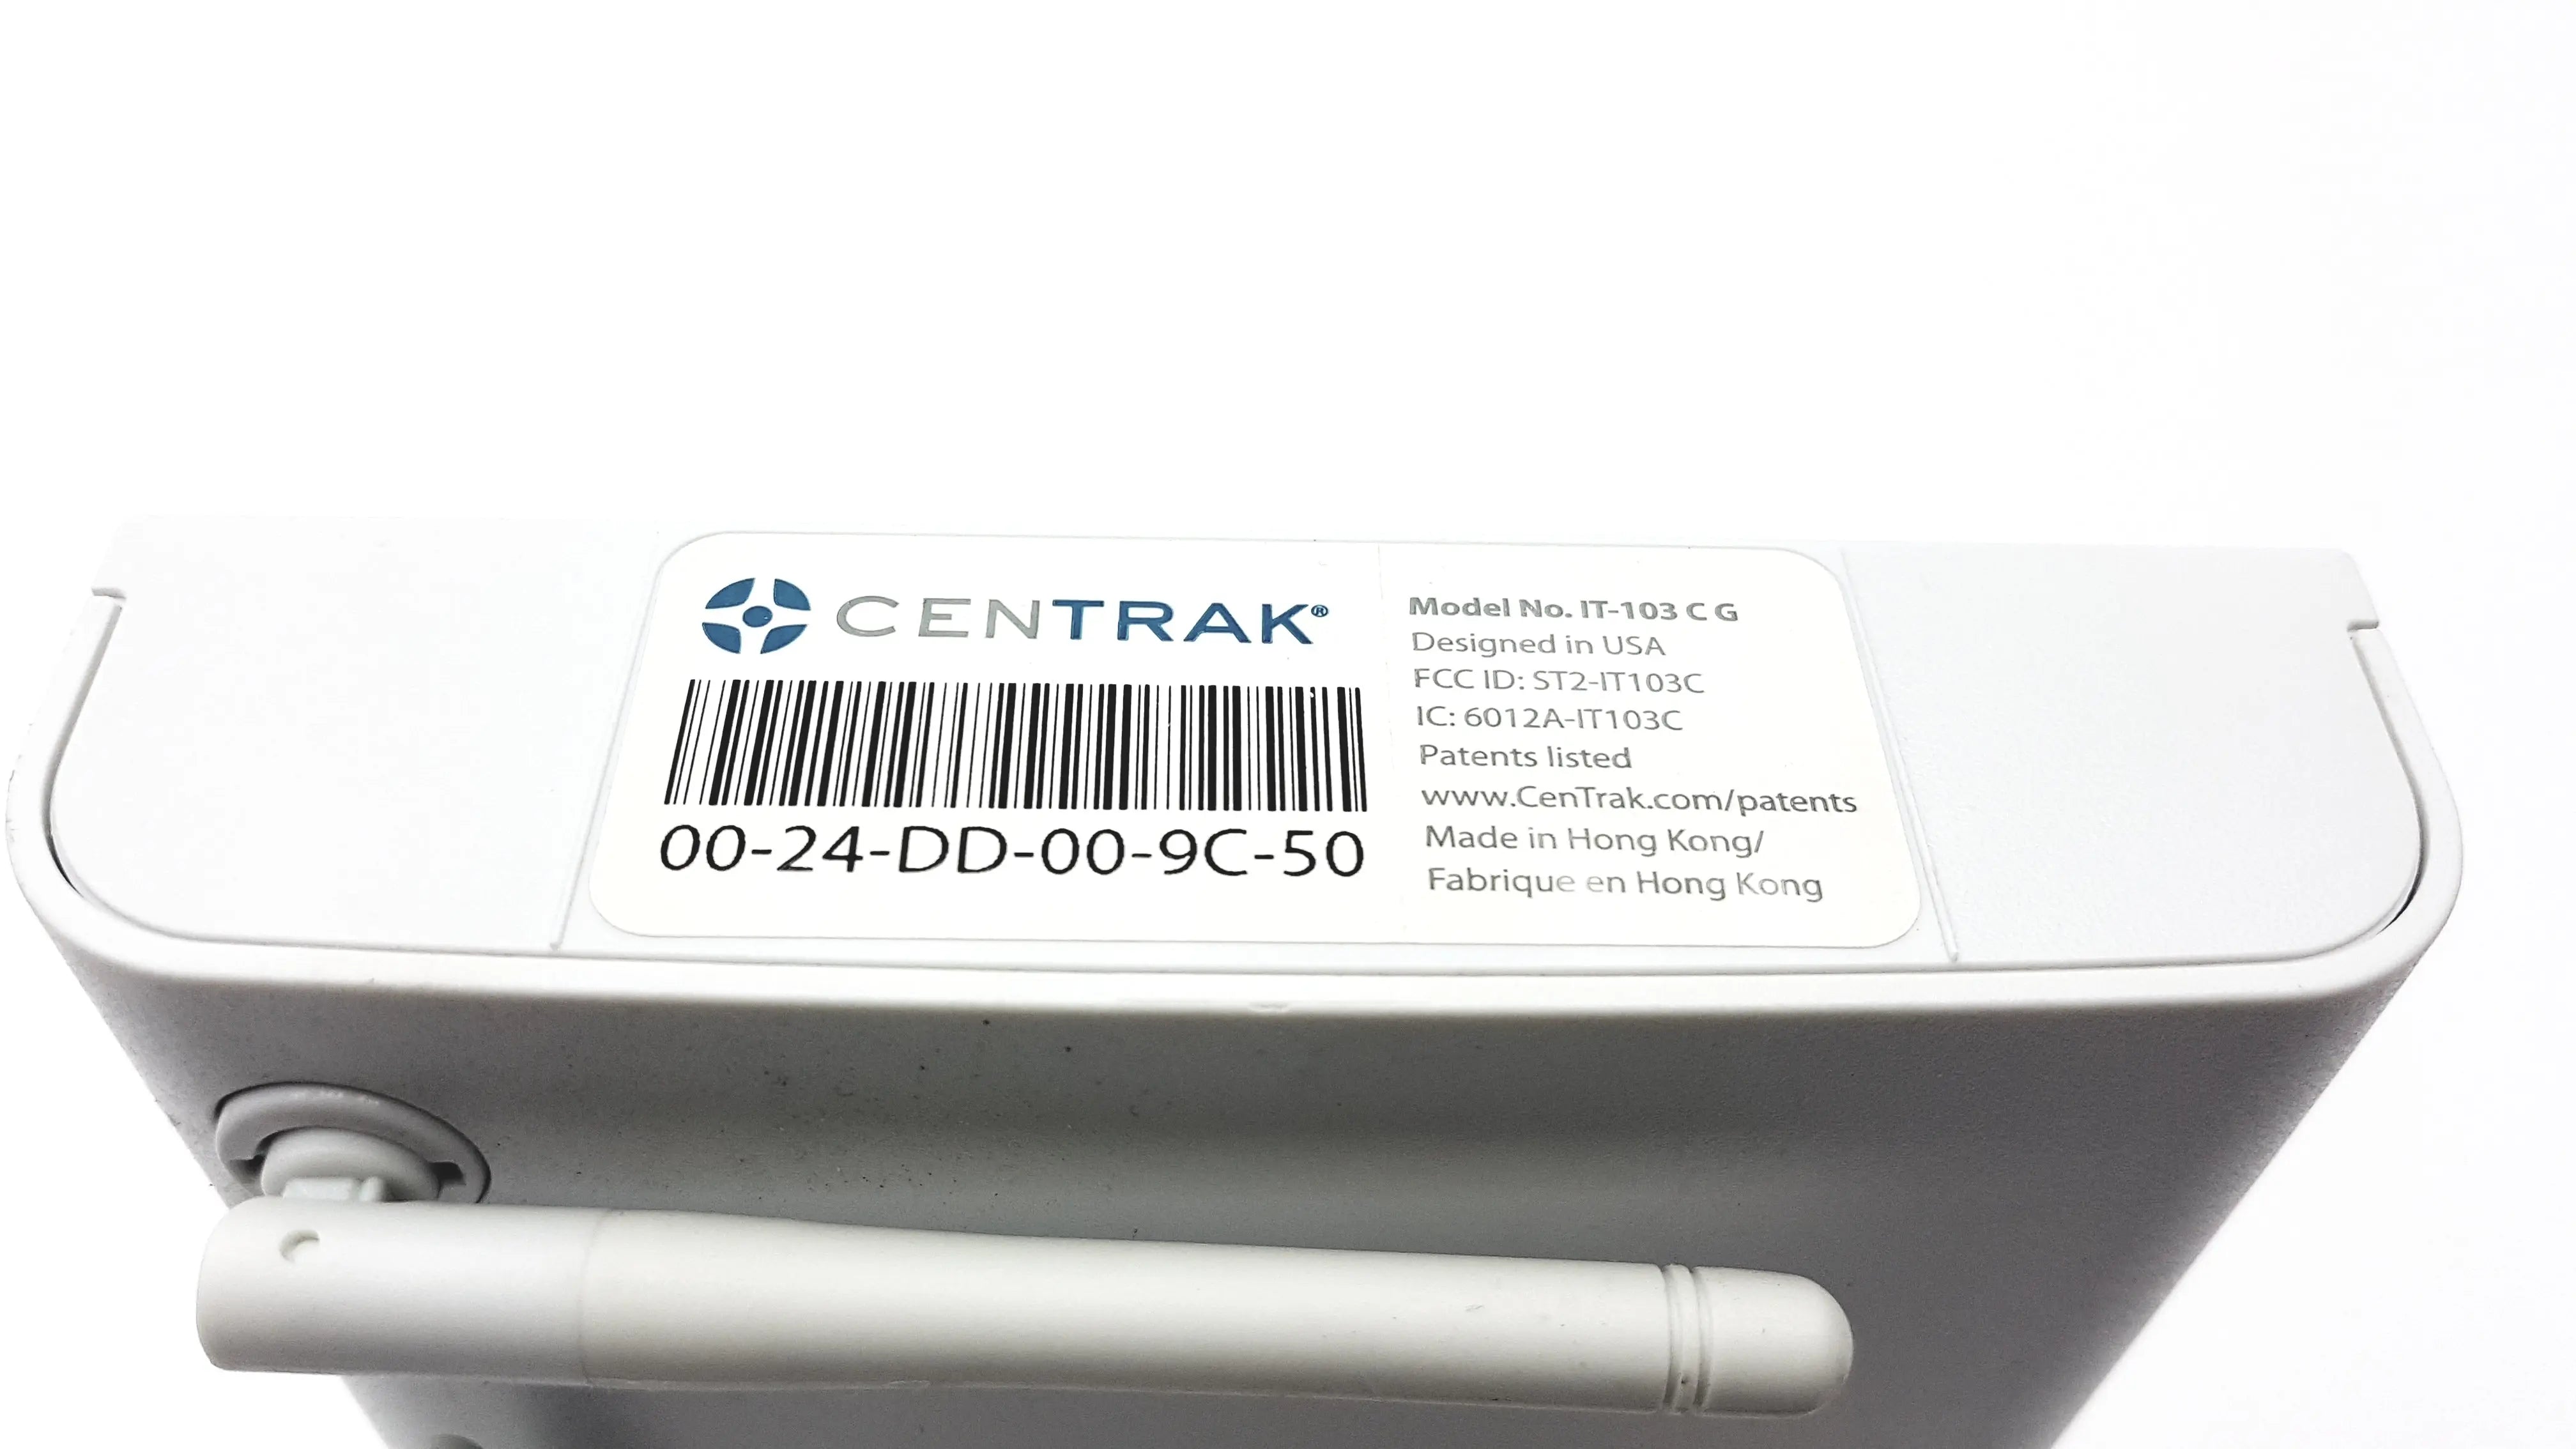 Load image into Gallery viewer, A Biomedical Service CenTrak Star ITK-103 C G 100.00